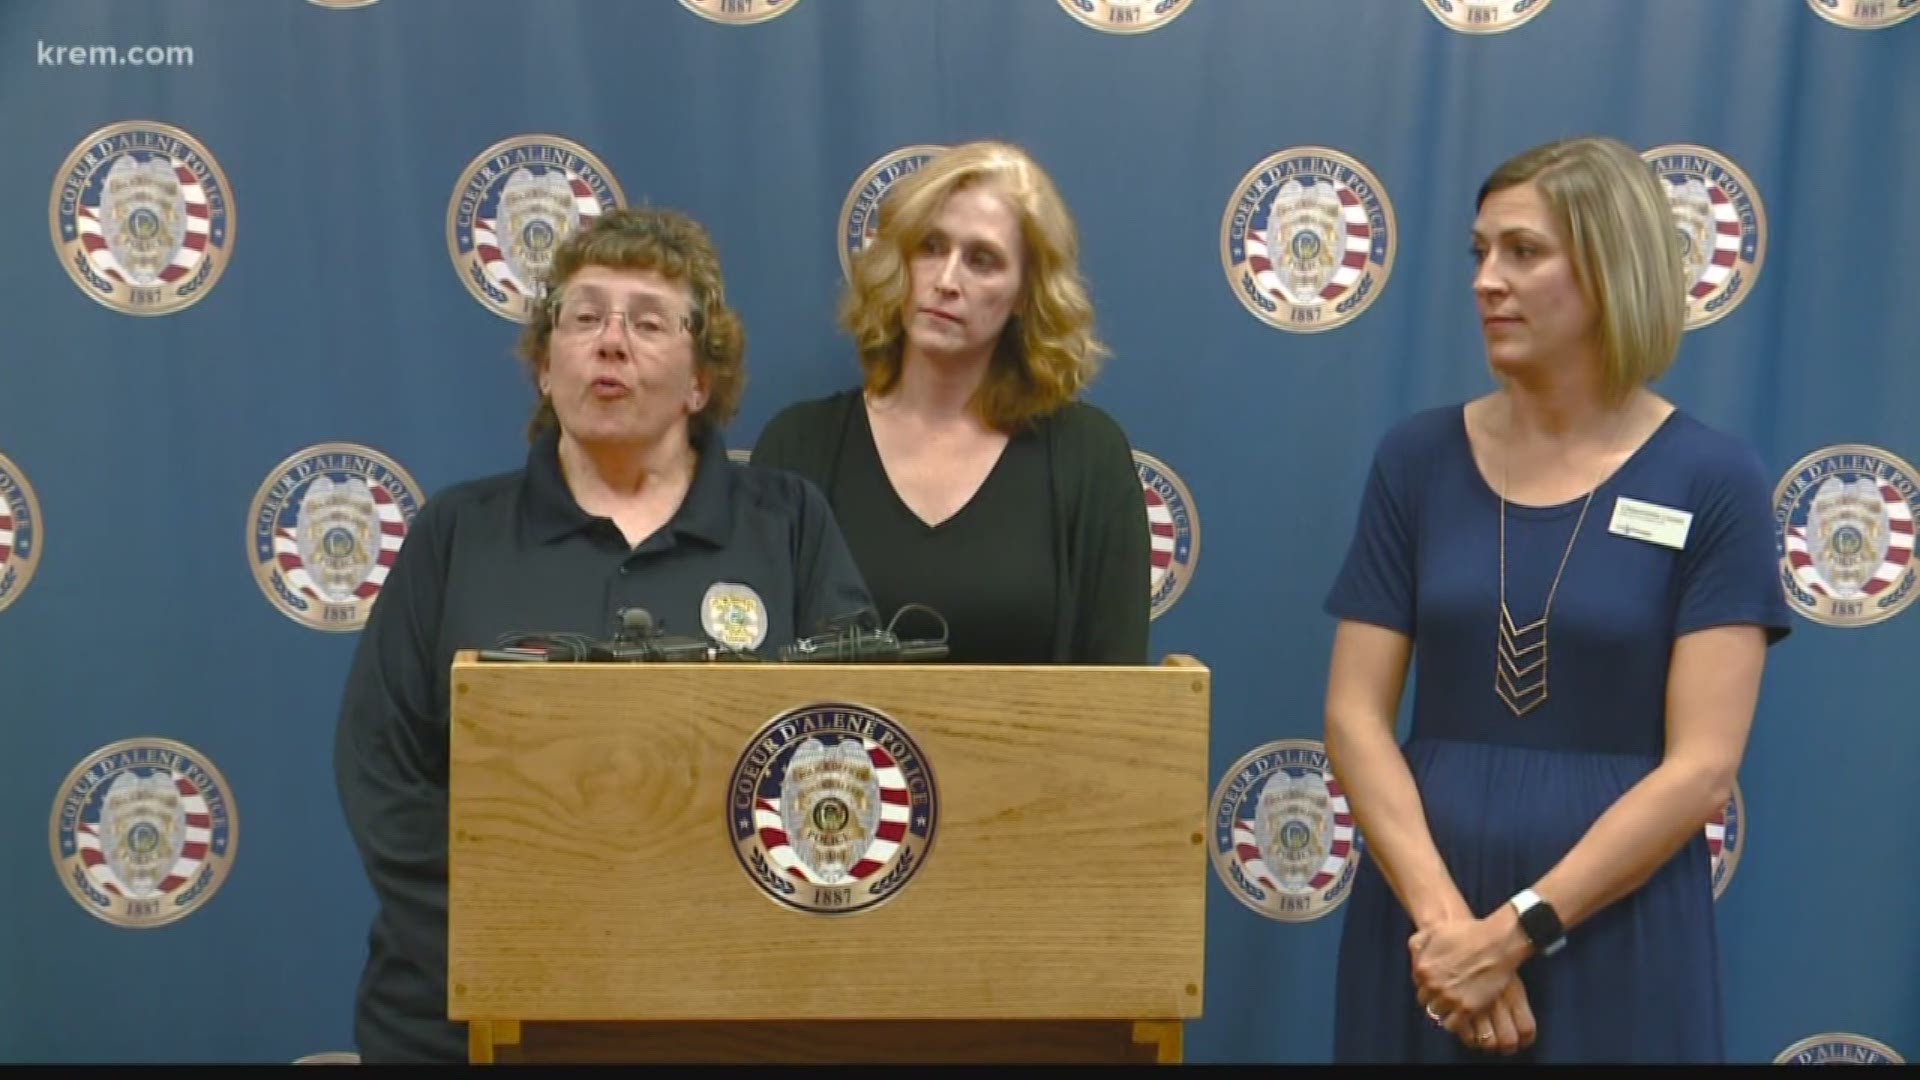 The Kootenai County Prosecutor, Coeur d’Alene police, Idaho State Police and domestic violence advocates hosted a press conference Thursday regarding an Idaho Supreme Court ruling that limits law enforcement’s ability to make an arrest for a misdemeanor.